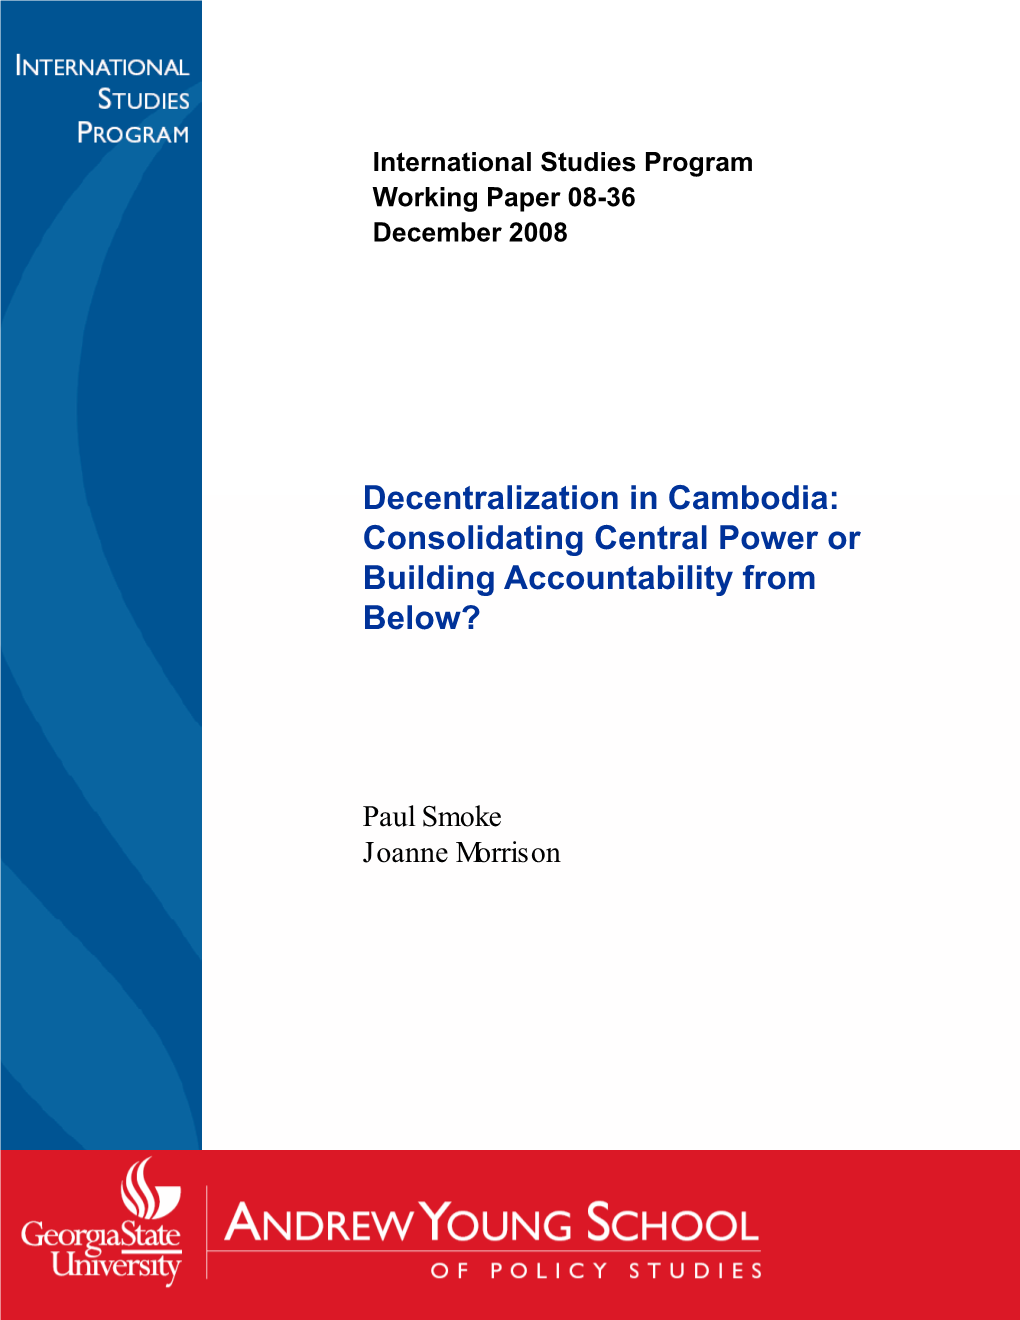 Decentralization in Cambodia: Consolidating Central Power Or Building Accountability from Below?